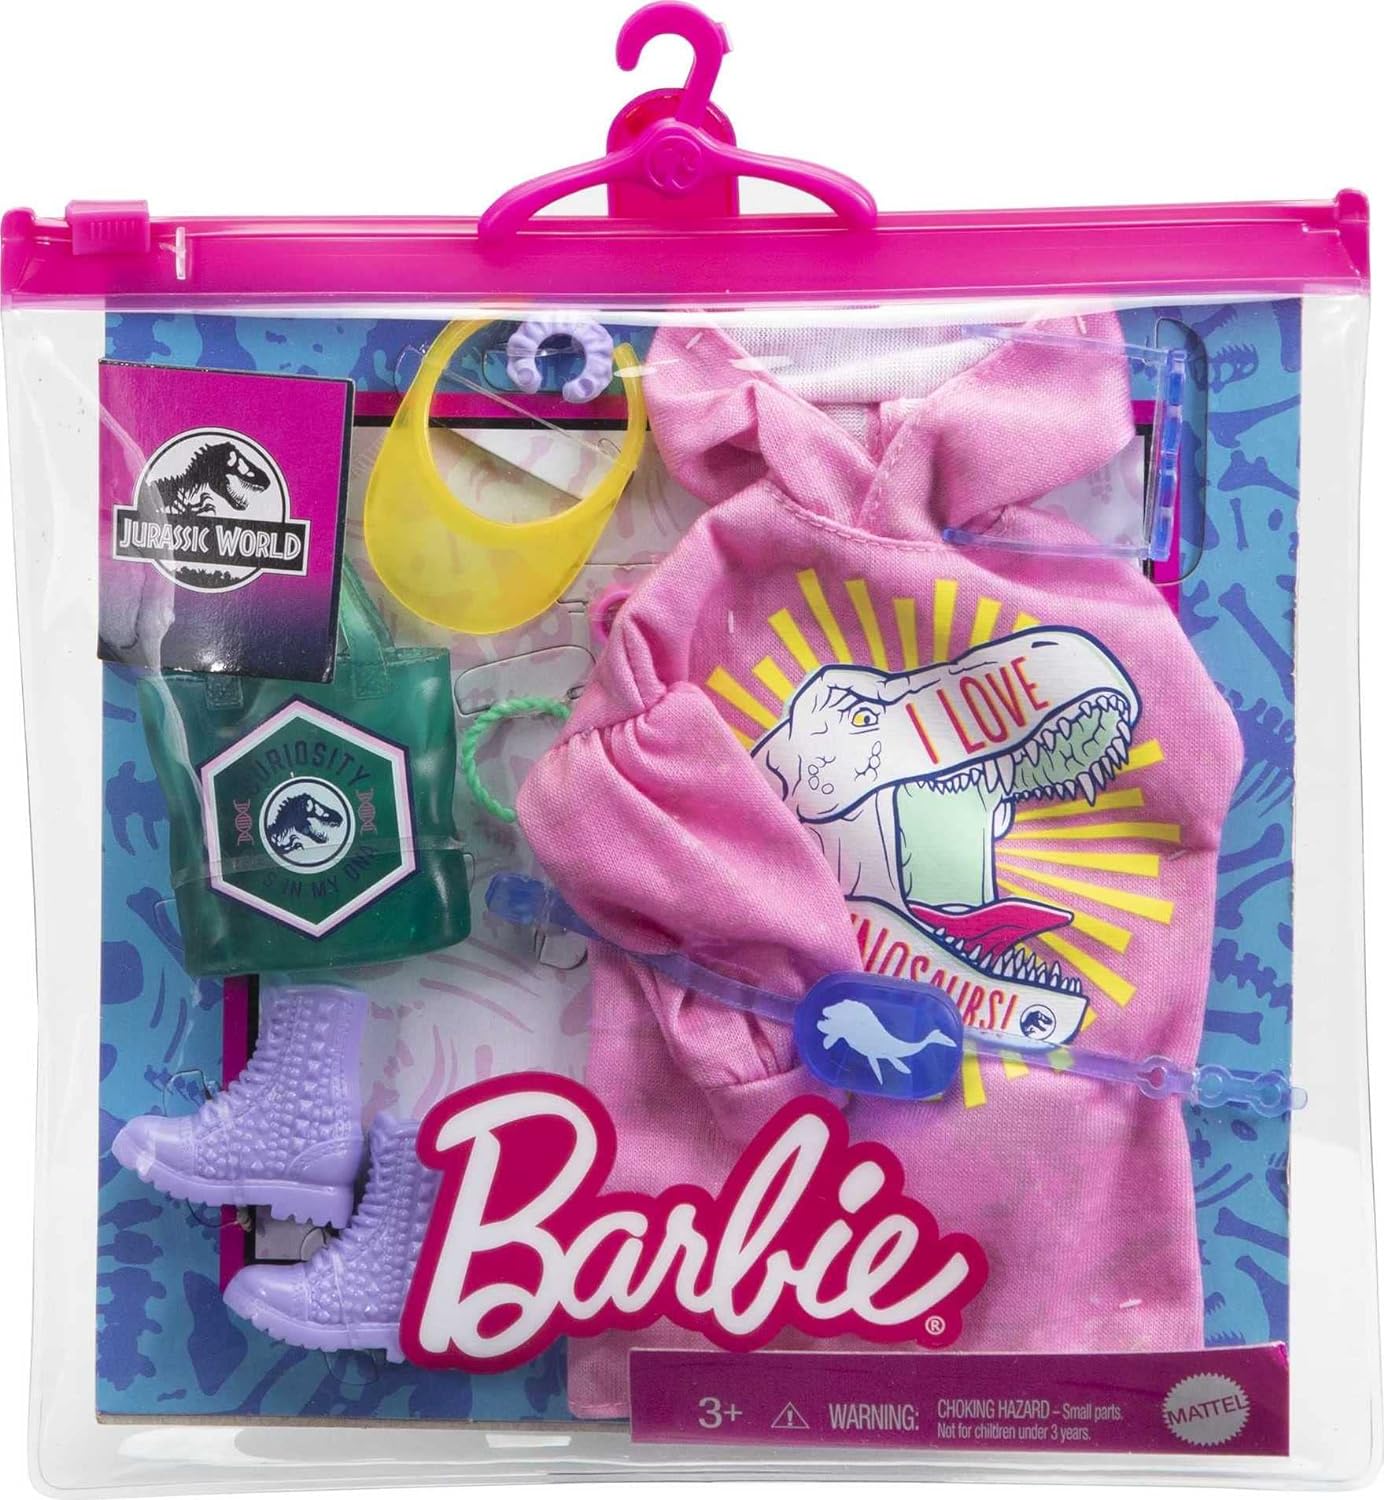 Barbie Clothing & Accessories Inspired by Jurassic World with 9 Storytelling Pieces for Barbie Dolls: Sweatshirt Dress with Dinosaur Graphic, Purple Boots, Fanny Pack, Heart-Shaped Sunglasses, 3-8Y